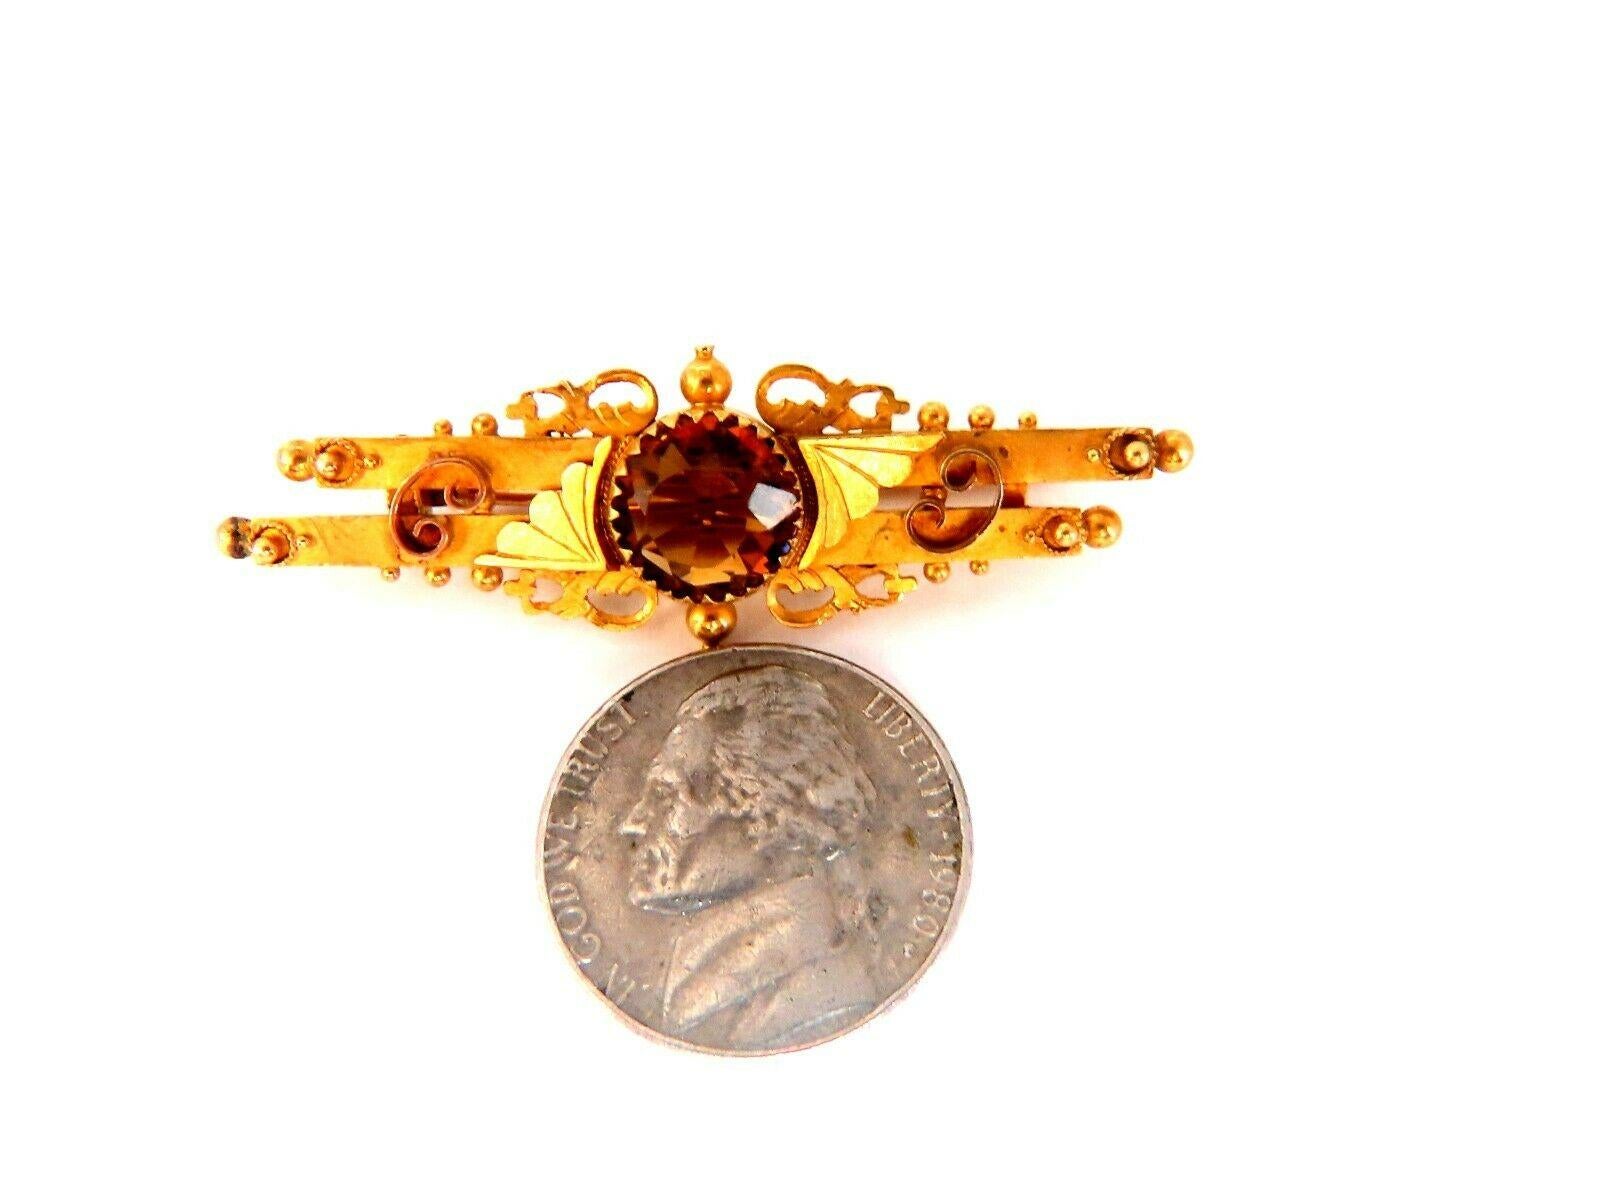 French Vintage Gilt Revival Pin

1.50ct Natural Citrine

19kt yellow gold 

Signed: 